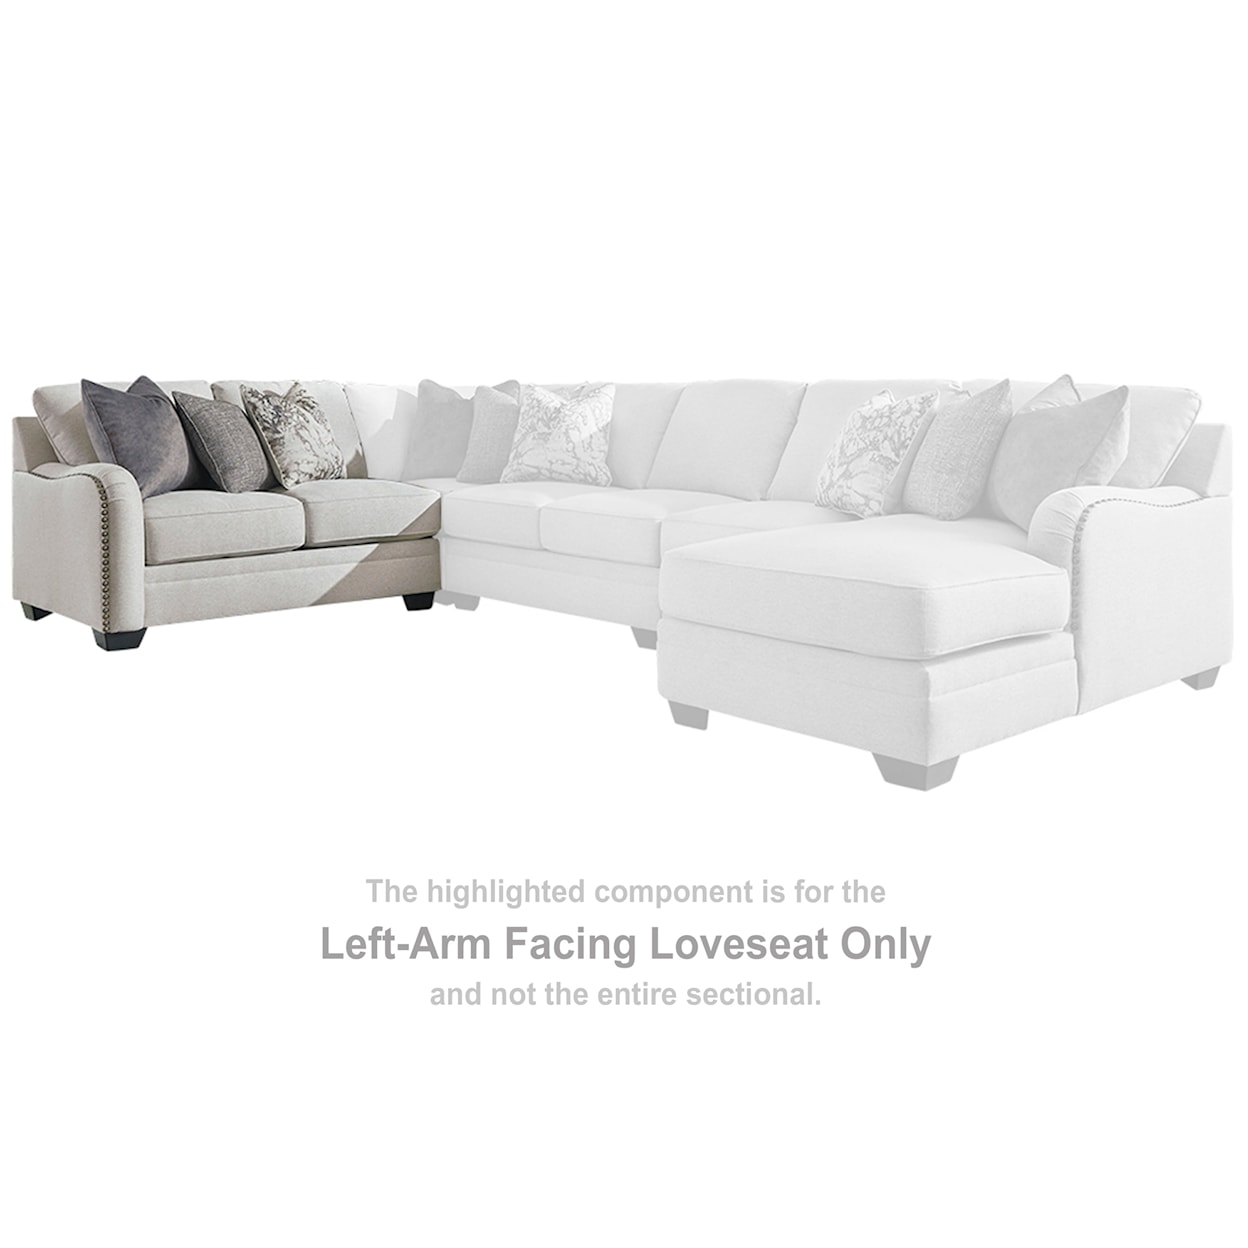 Benchcraft Dellara 3-Piece Sectional with Chaise